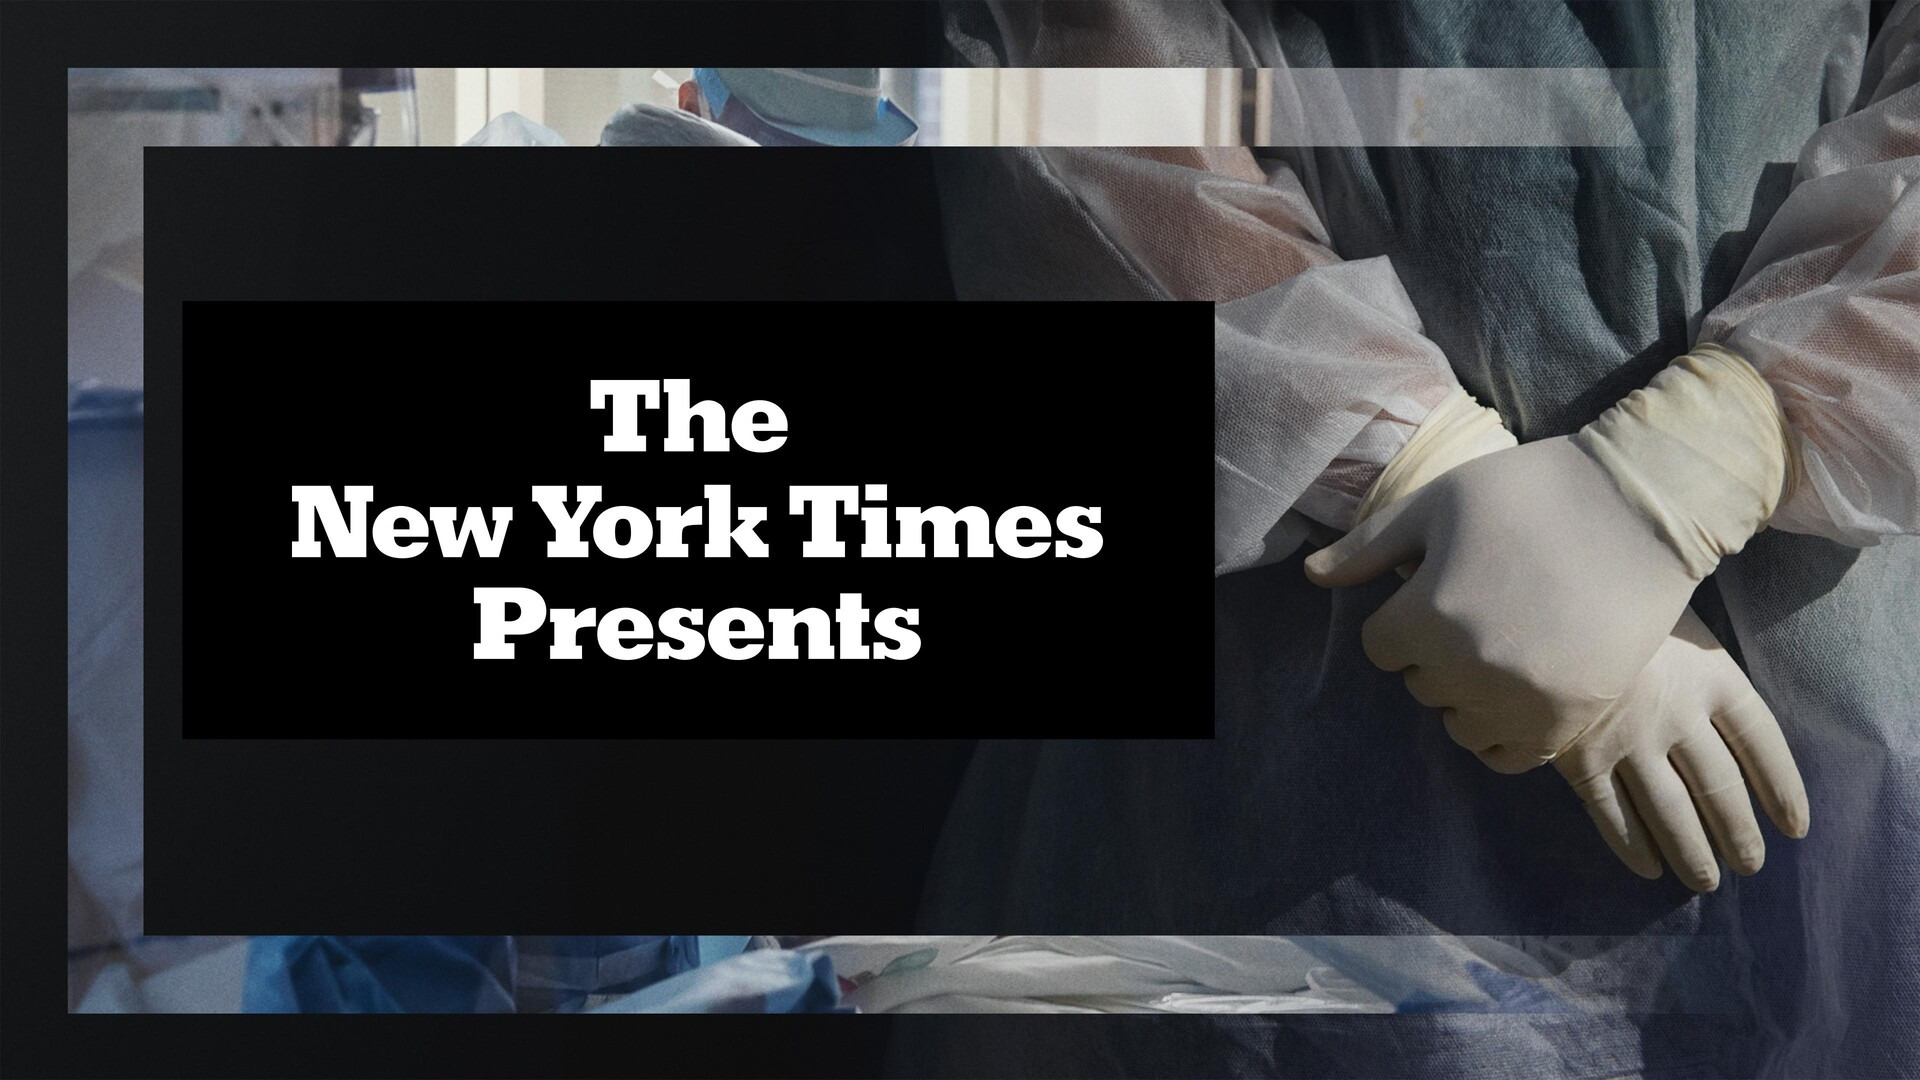 Show The New York Times Presents